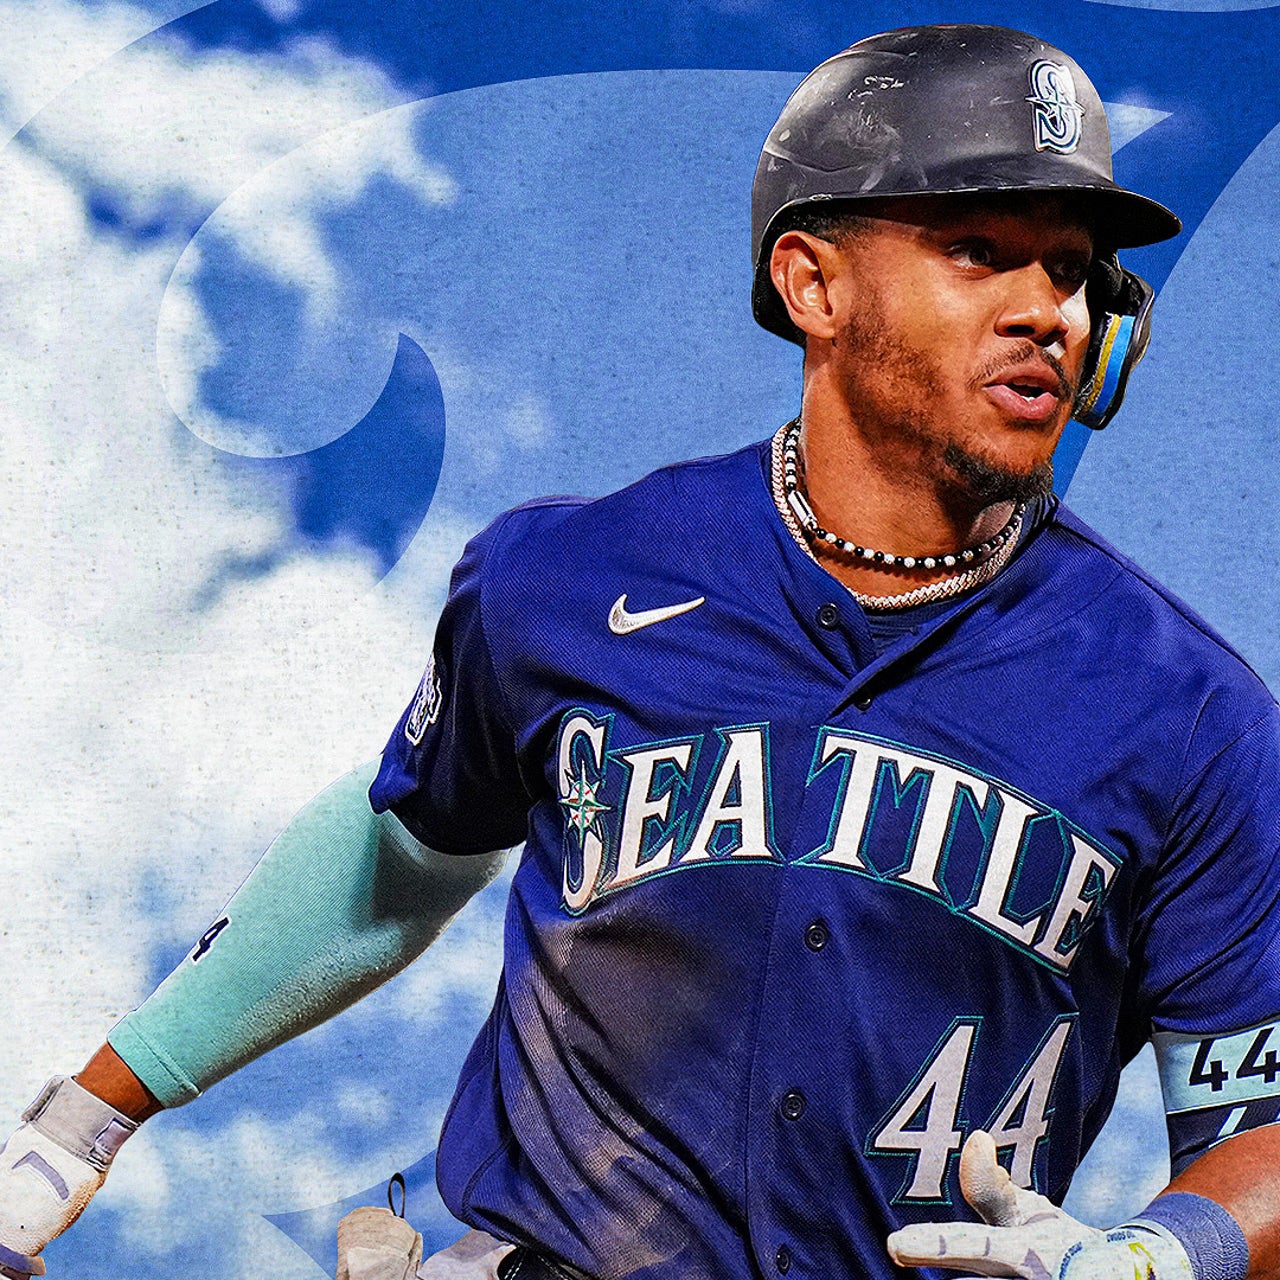 Julio Rodríguez opens up on his (and the Mariners') turnaround, and being  mentored by Ken Griffey Jr.